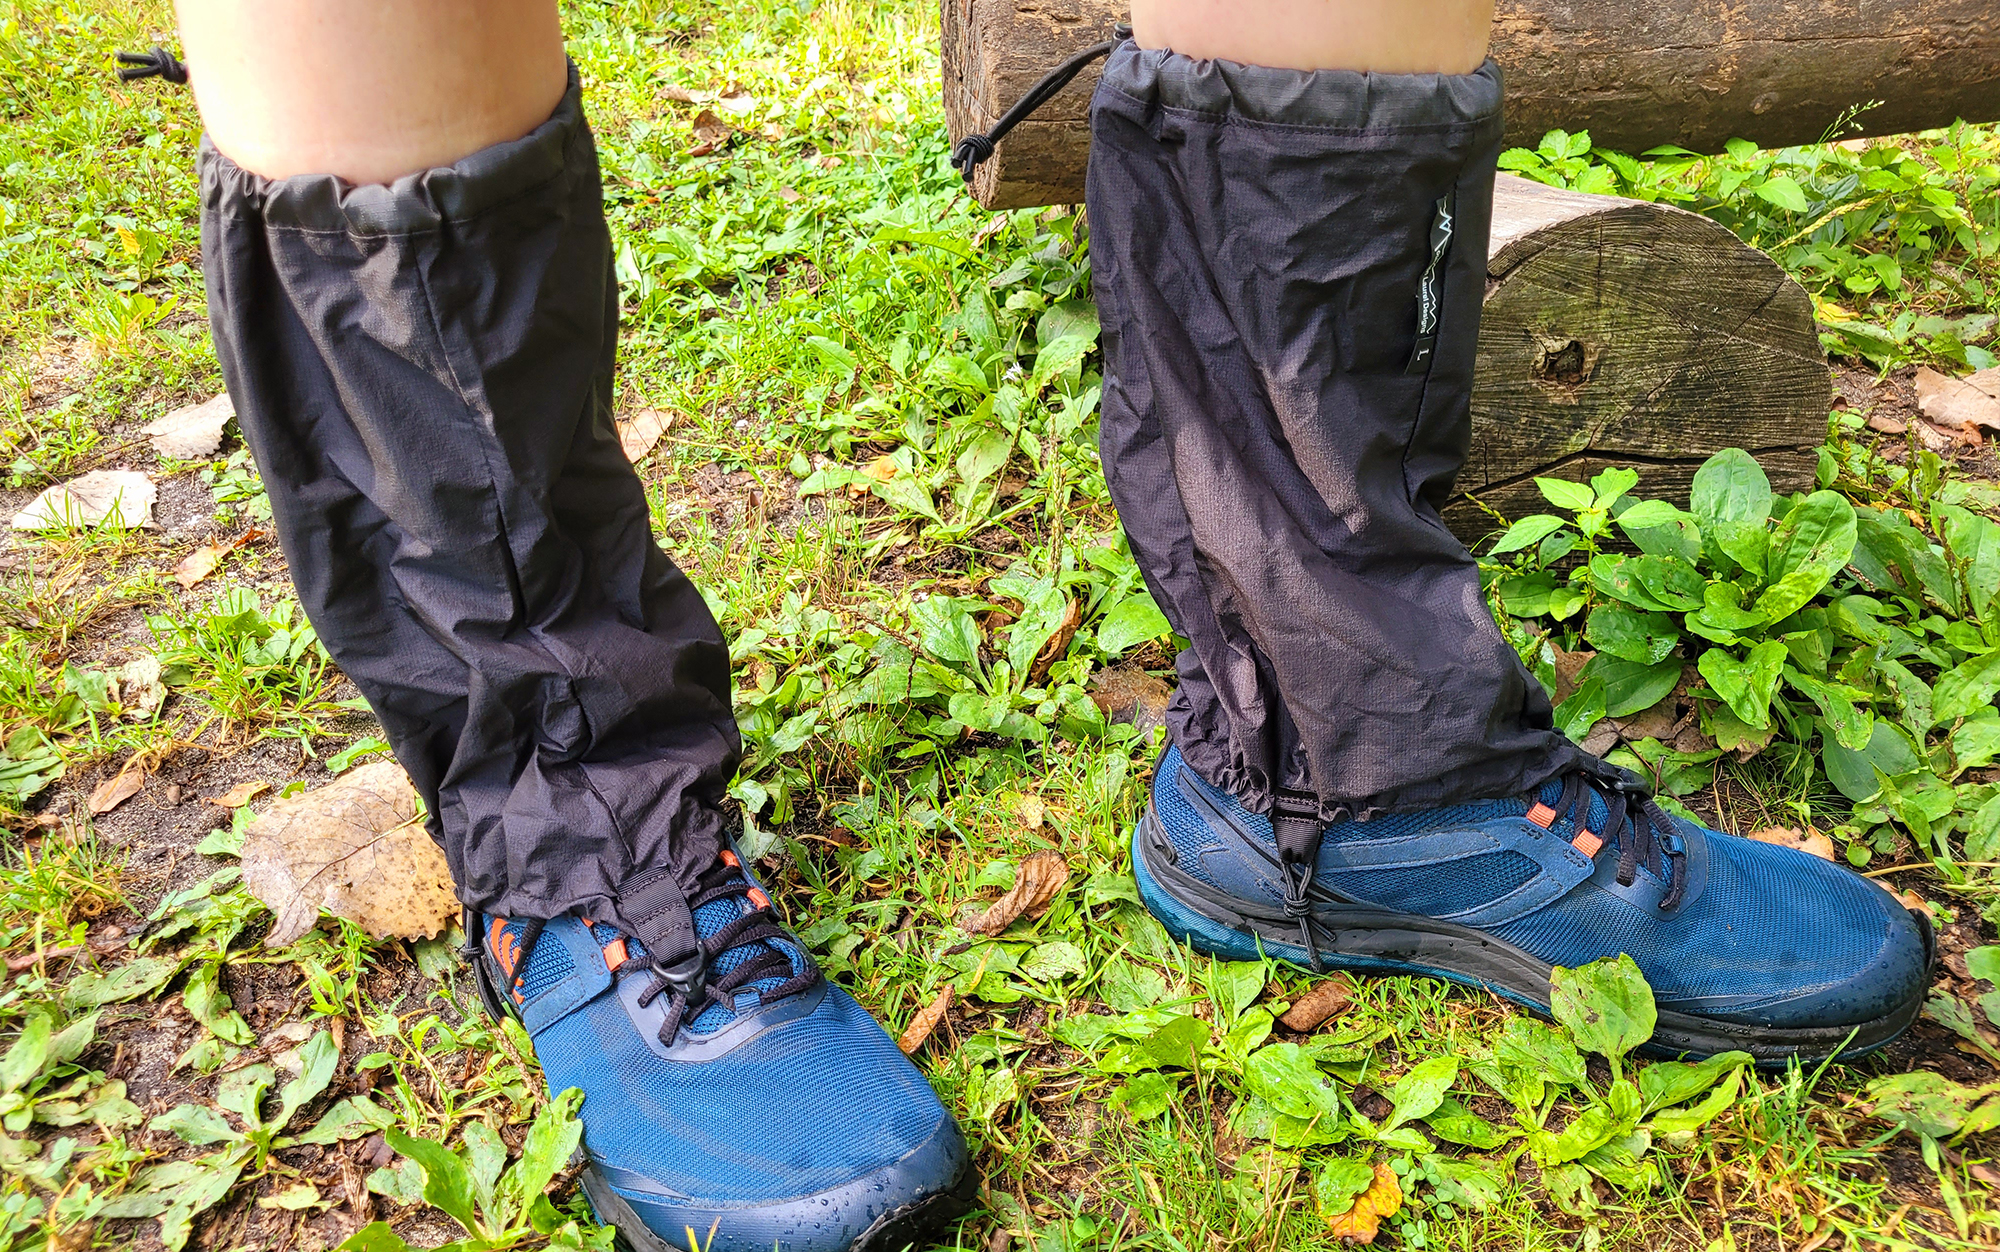 We tested the Mountain Laurel Designs Superlight Gaiters.